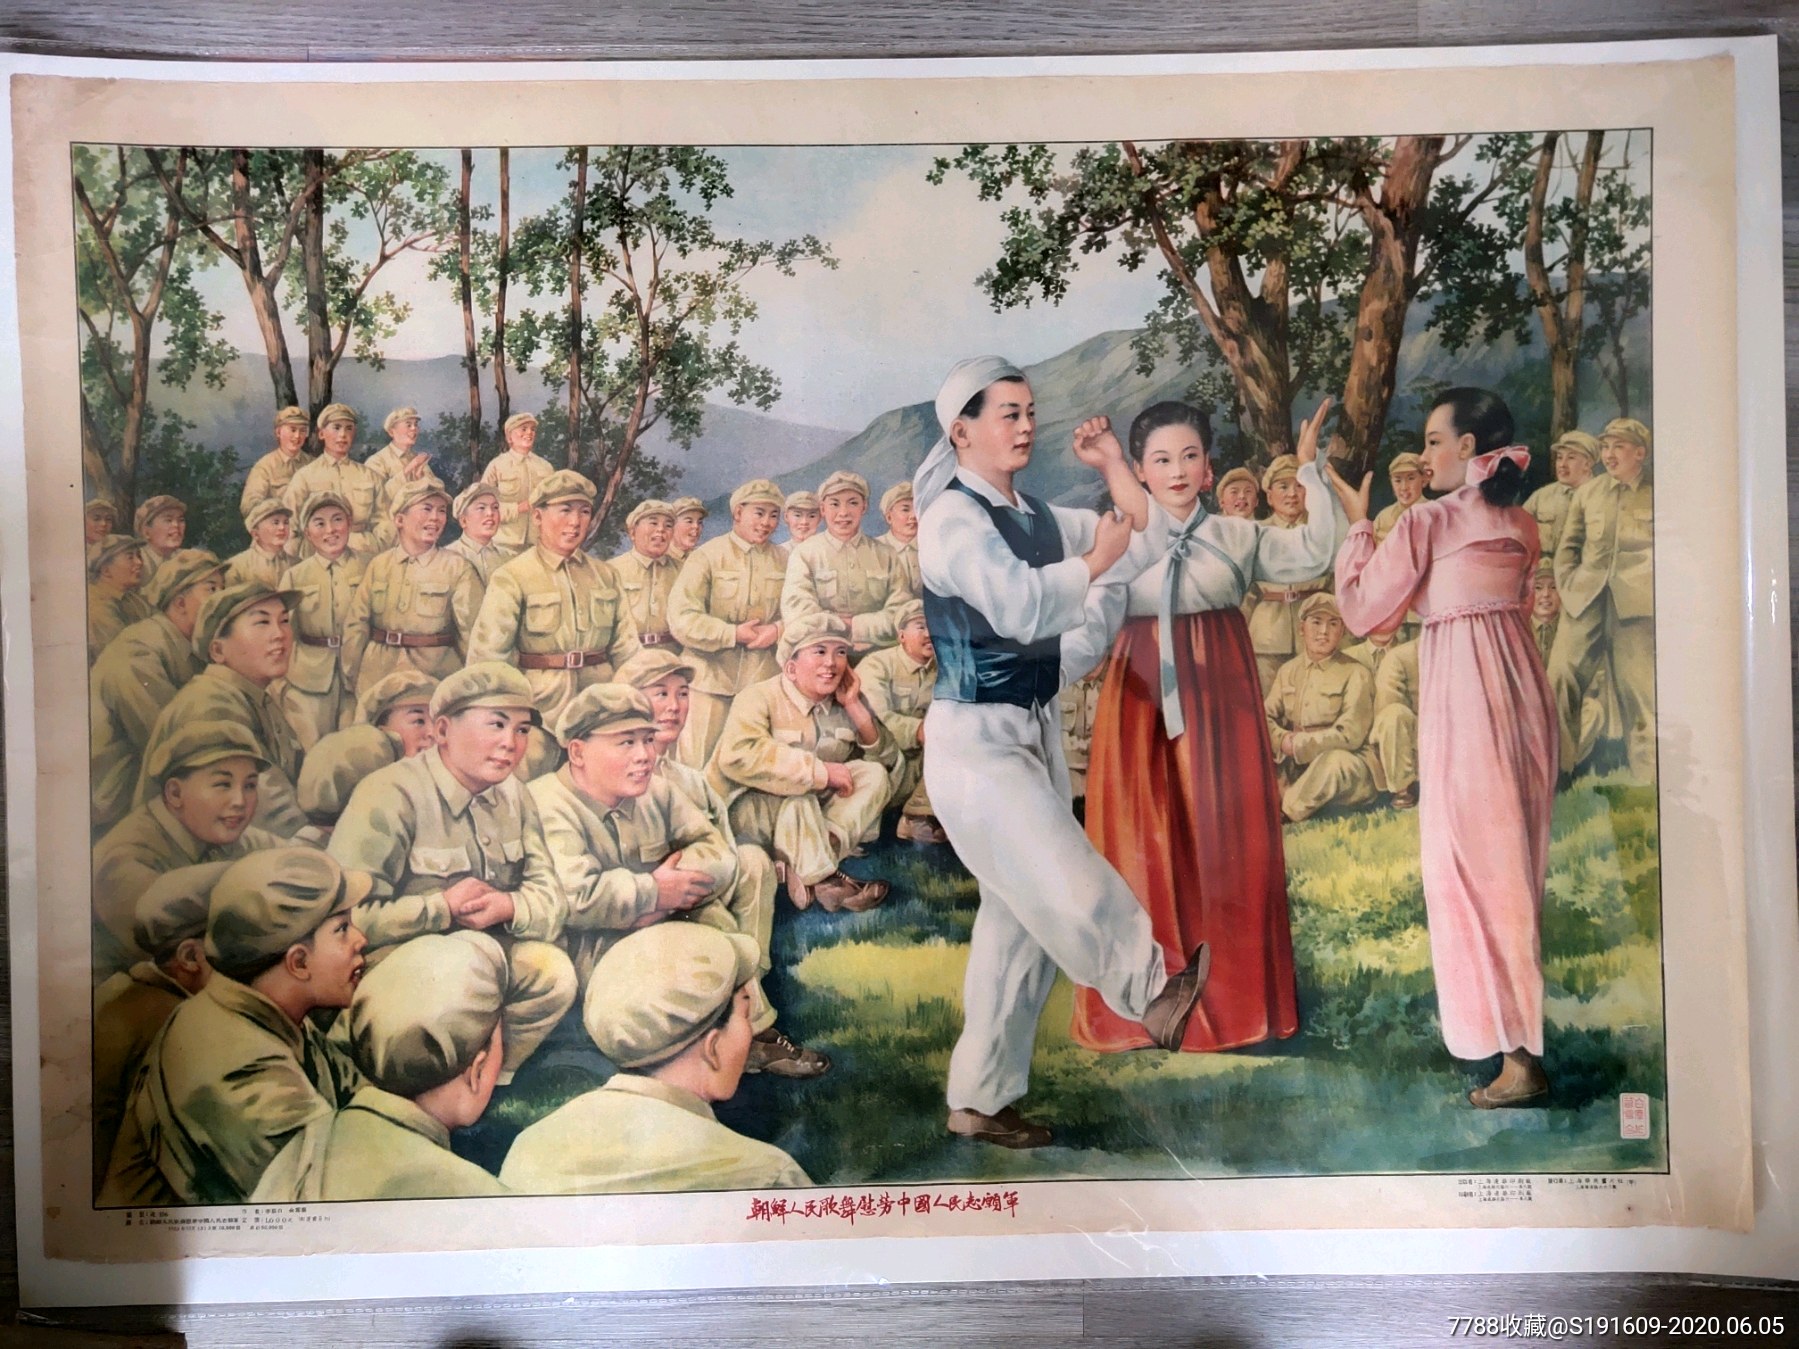 With Color and Fury, Anti-American Posters Appear in North Korea - The New York Times